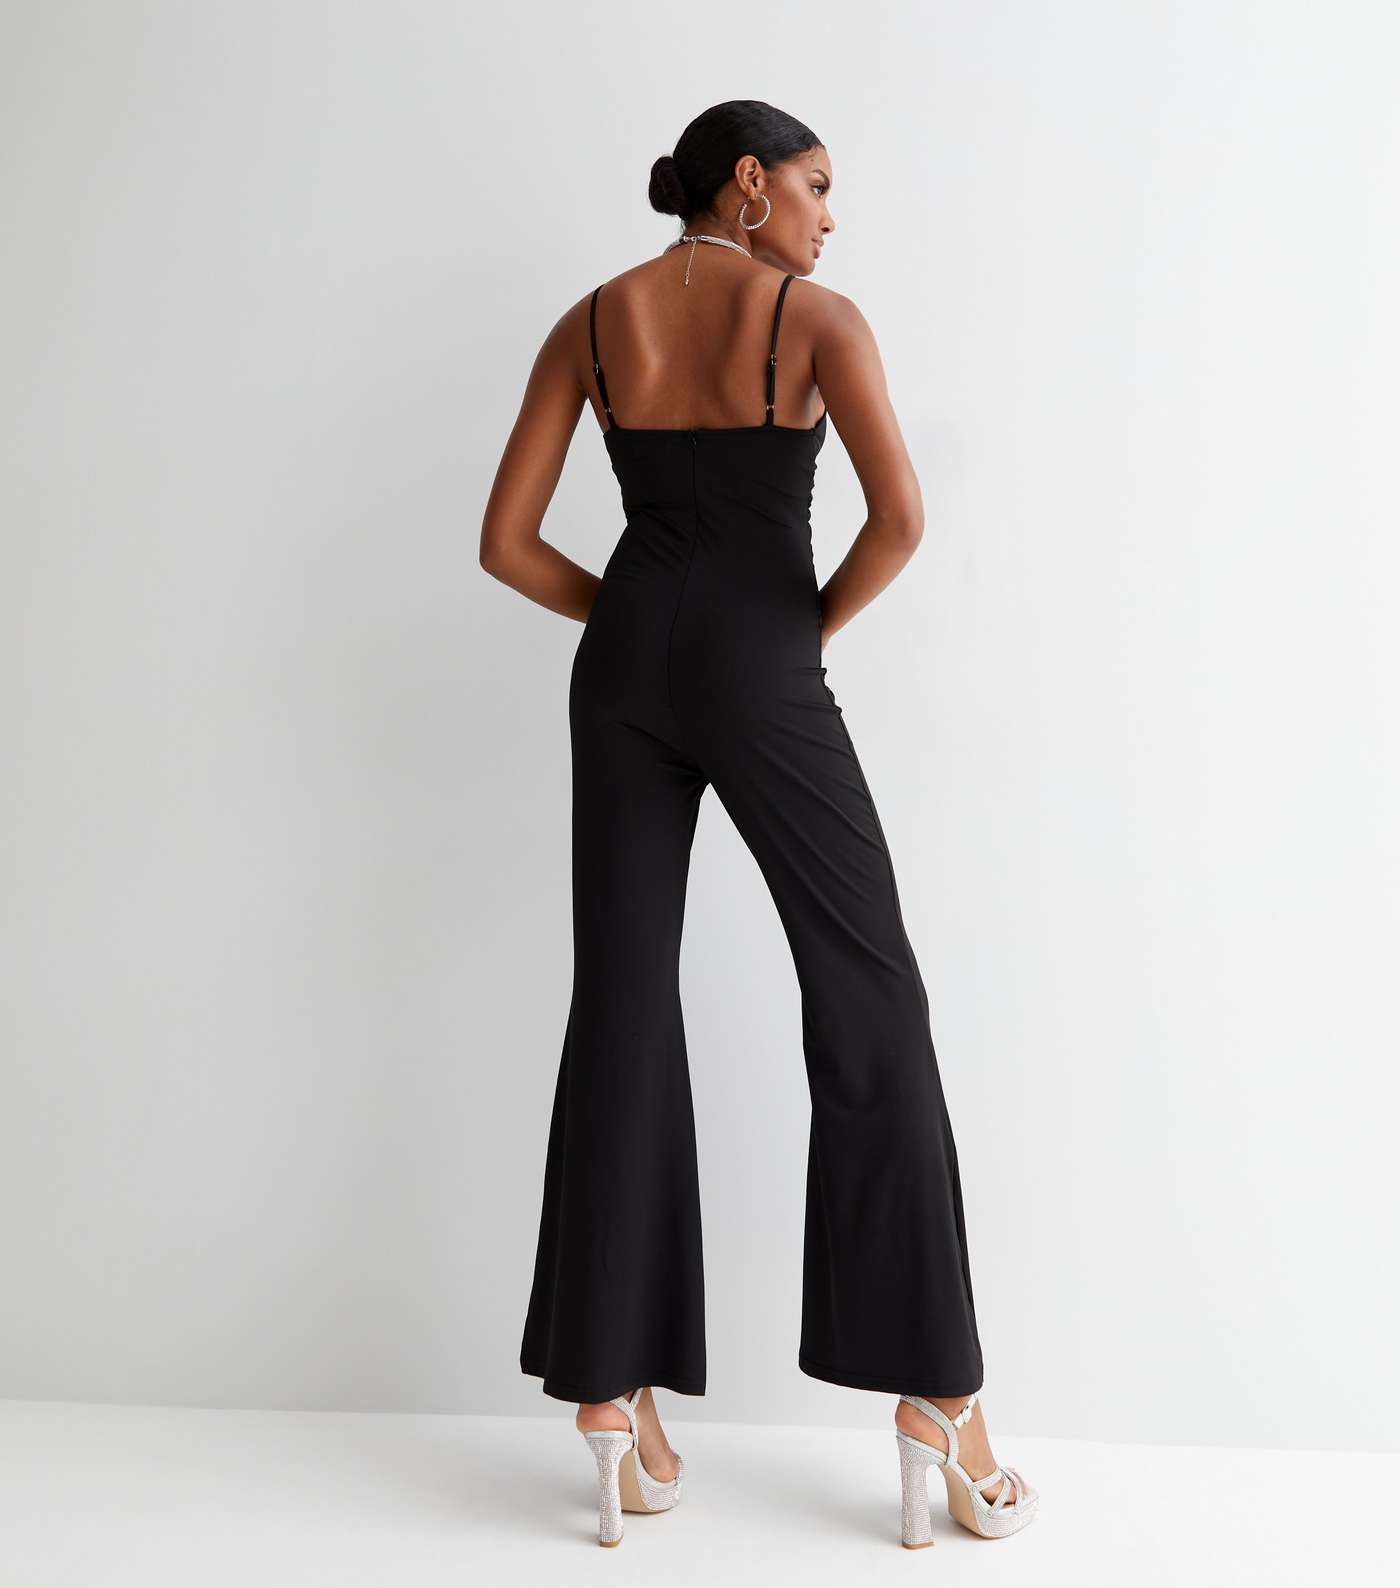 Cameo Rose Black Ruched Strappy Flared Jumpsuit Image 4